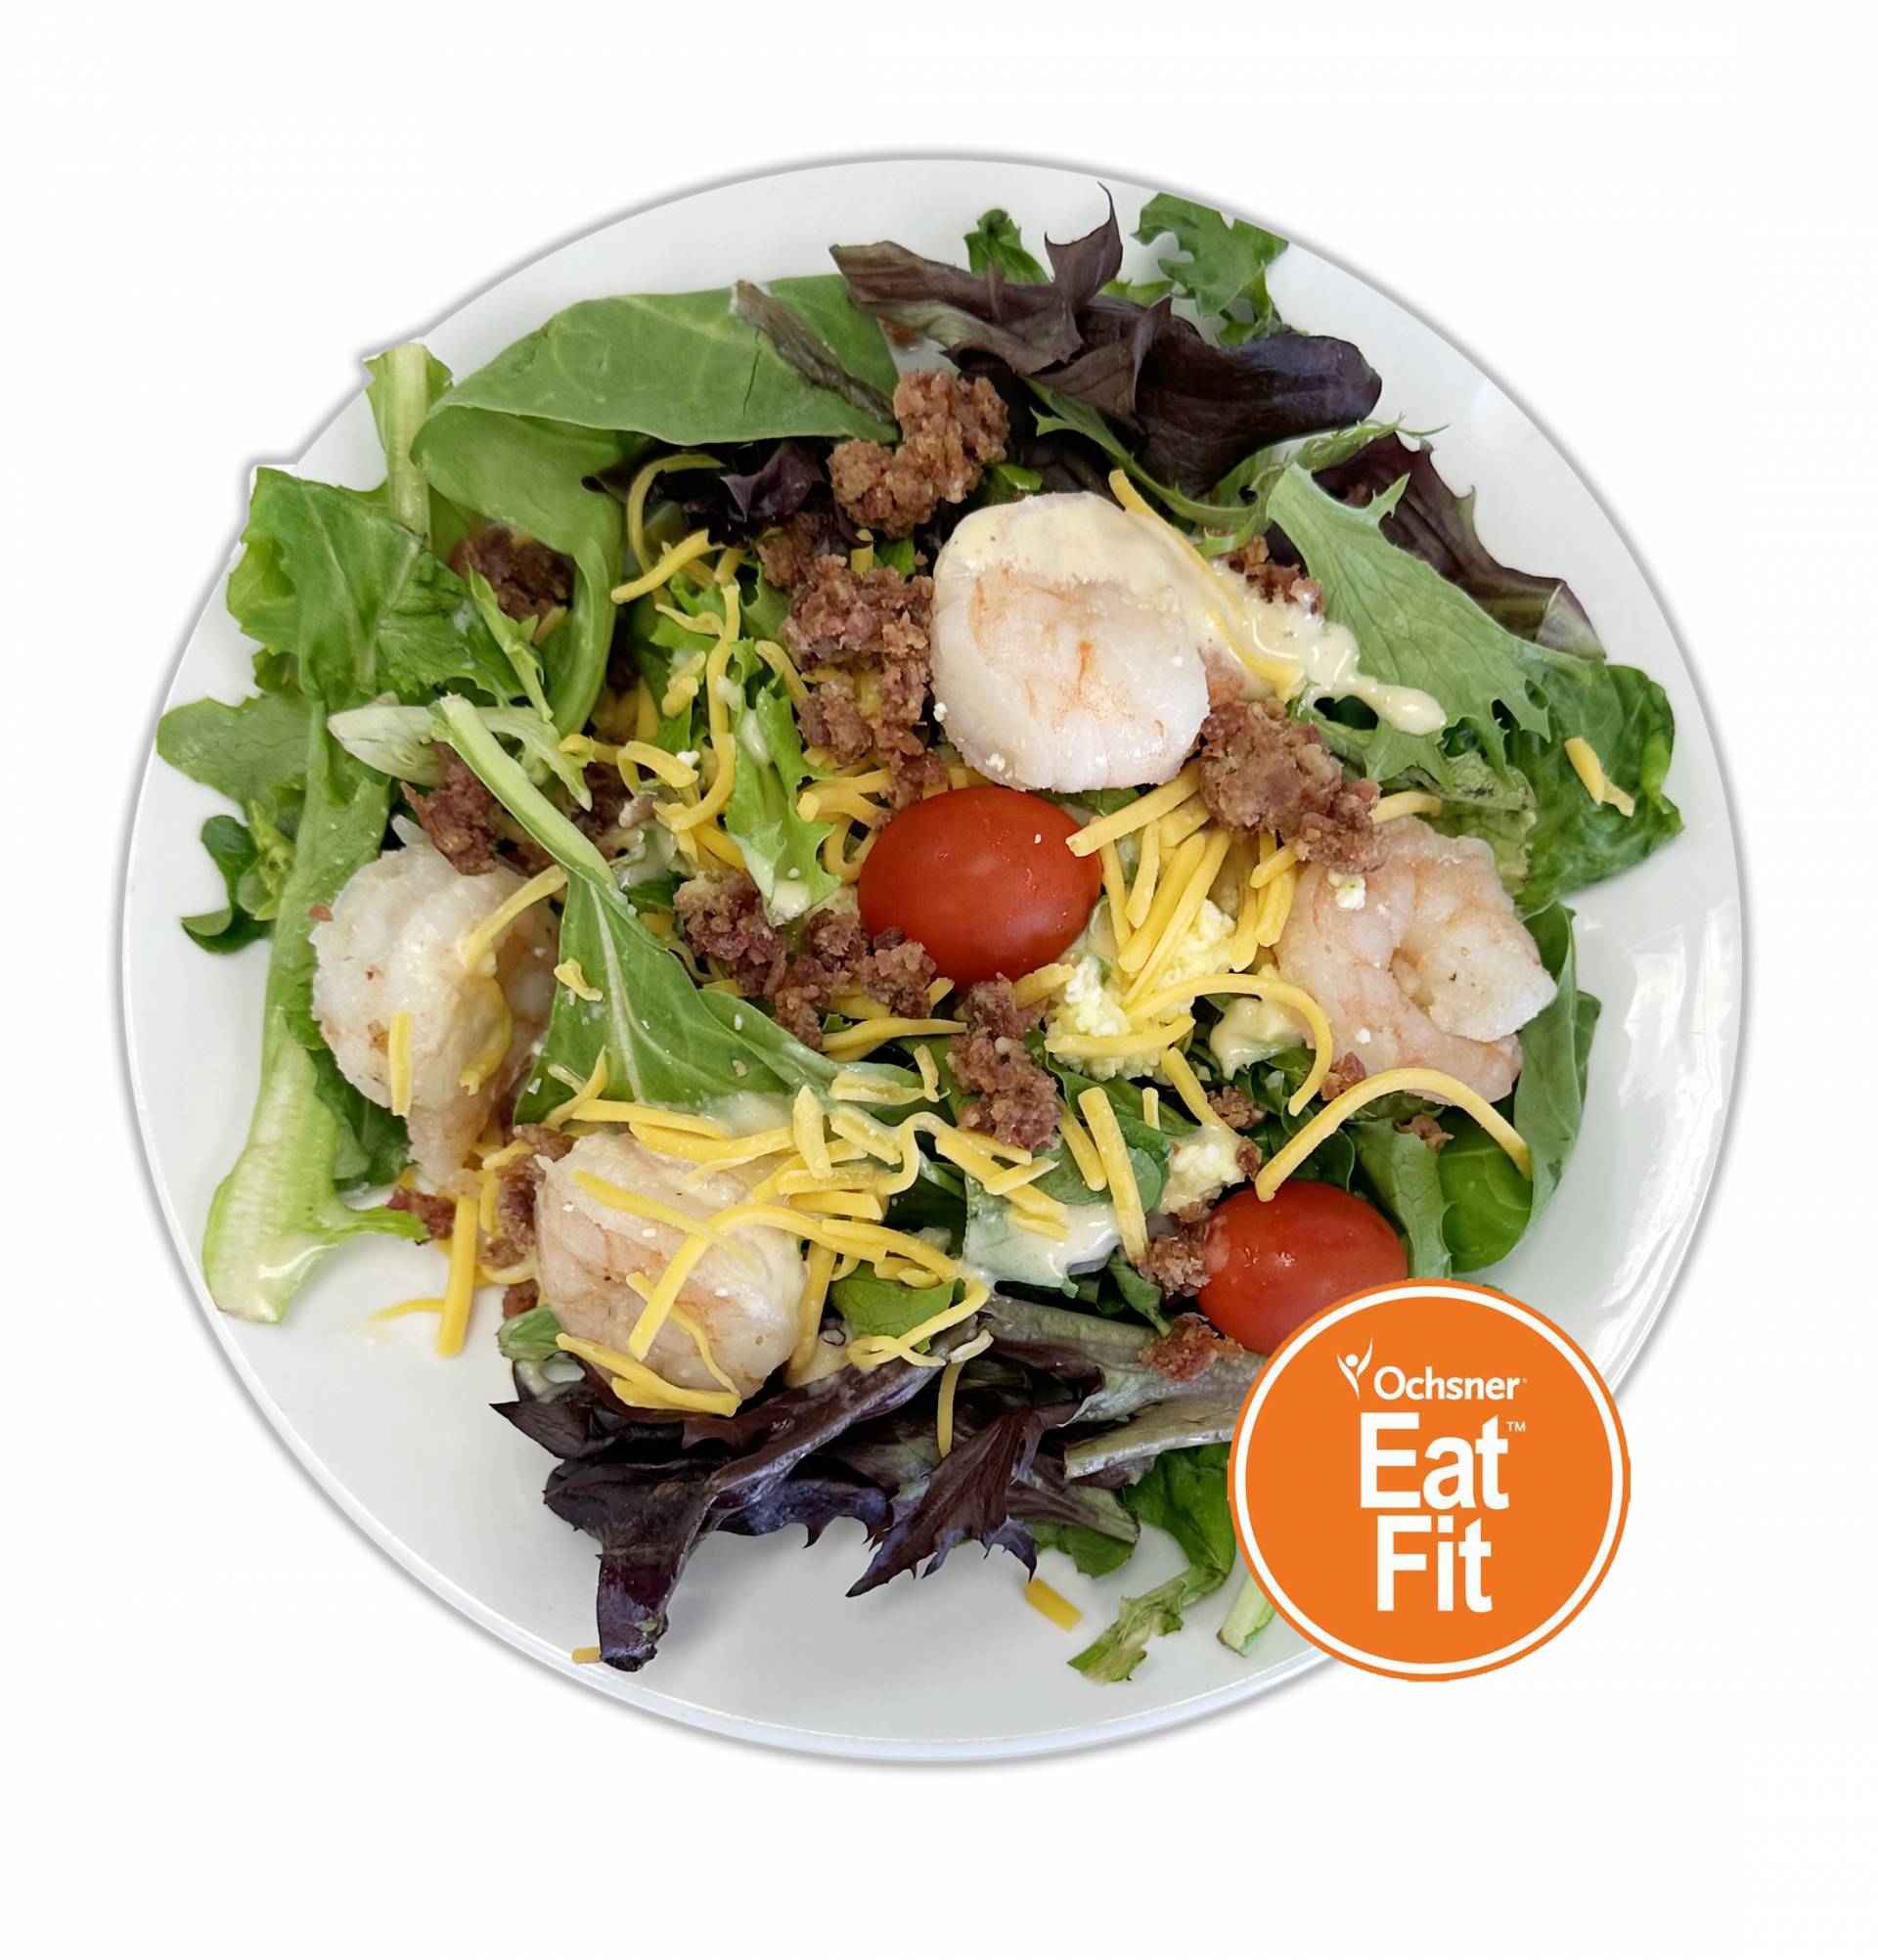 Cobb Salad with Shrimp, Spring Mix, Bacon, Boiled Eggs and House Made Dijon Dressing - Low Carb